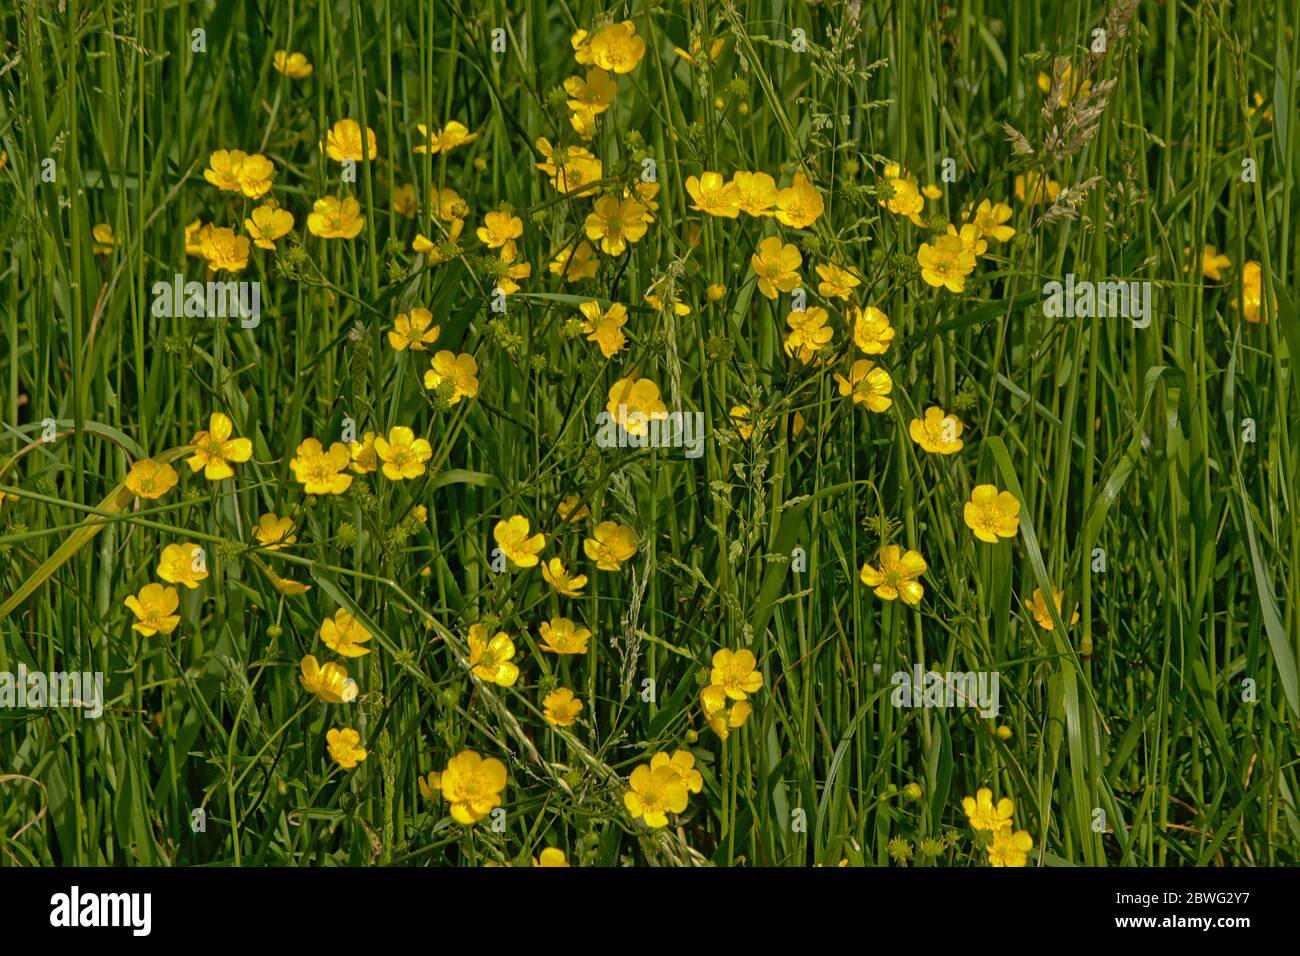 Lots`s of buttercups in a meadow -Ranunculus. Stock Photo